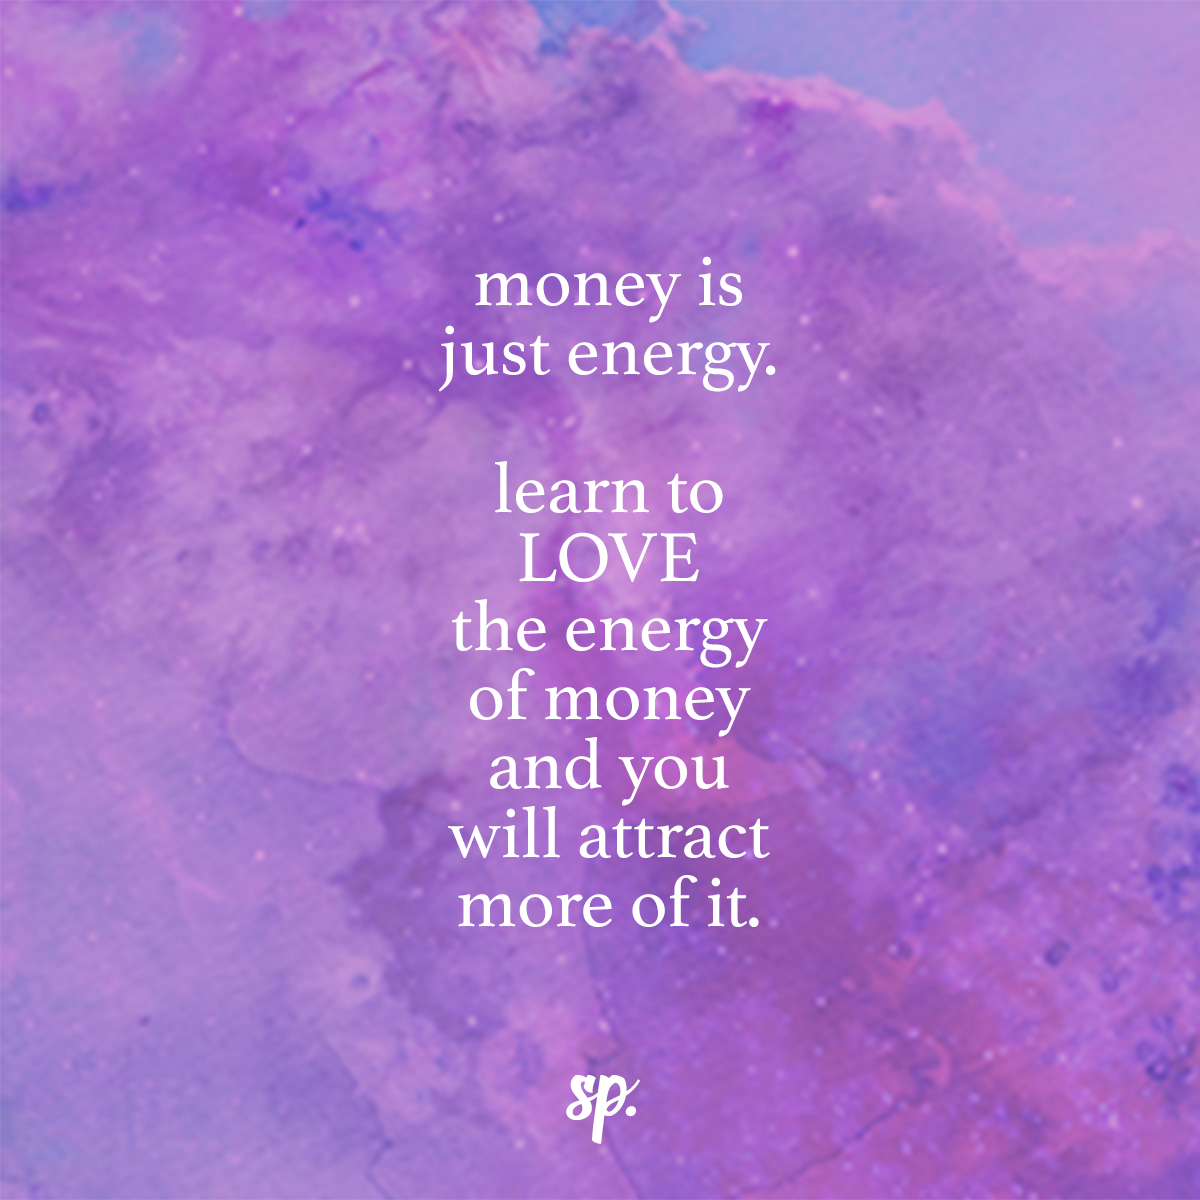 Money Is Just Energy and We Can Attract It! – Learn The Law Of Attraction